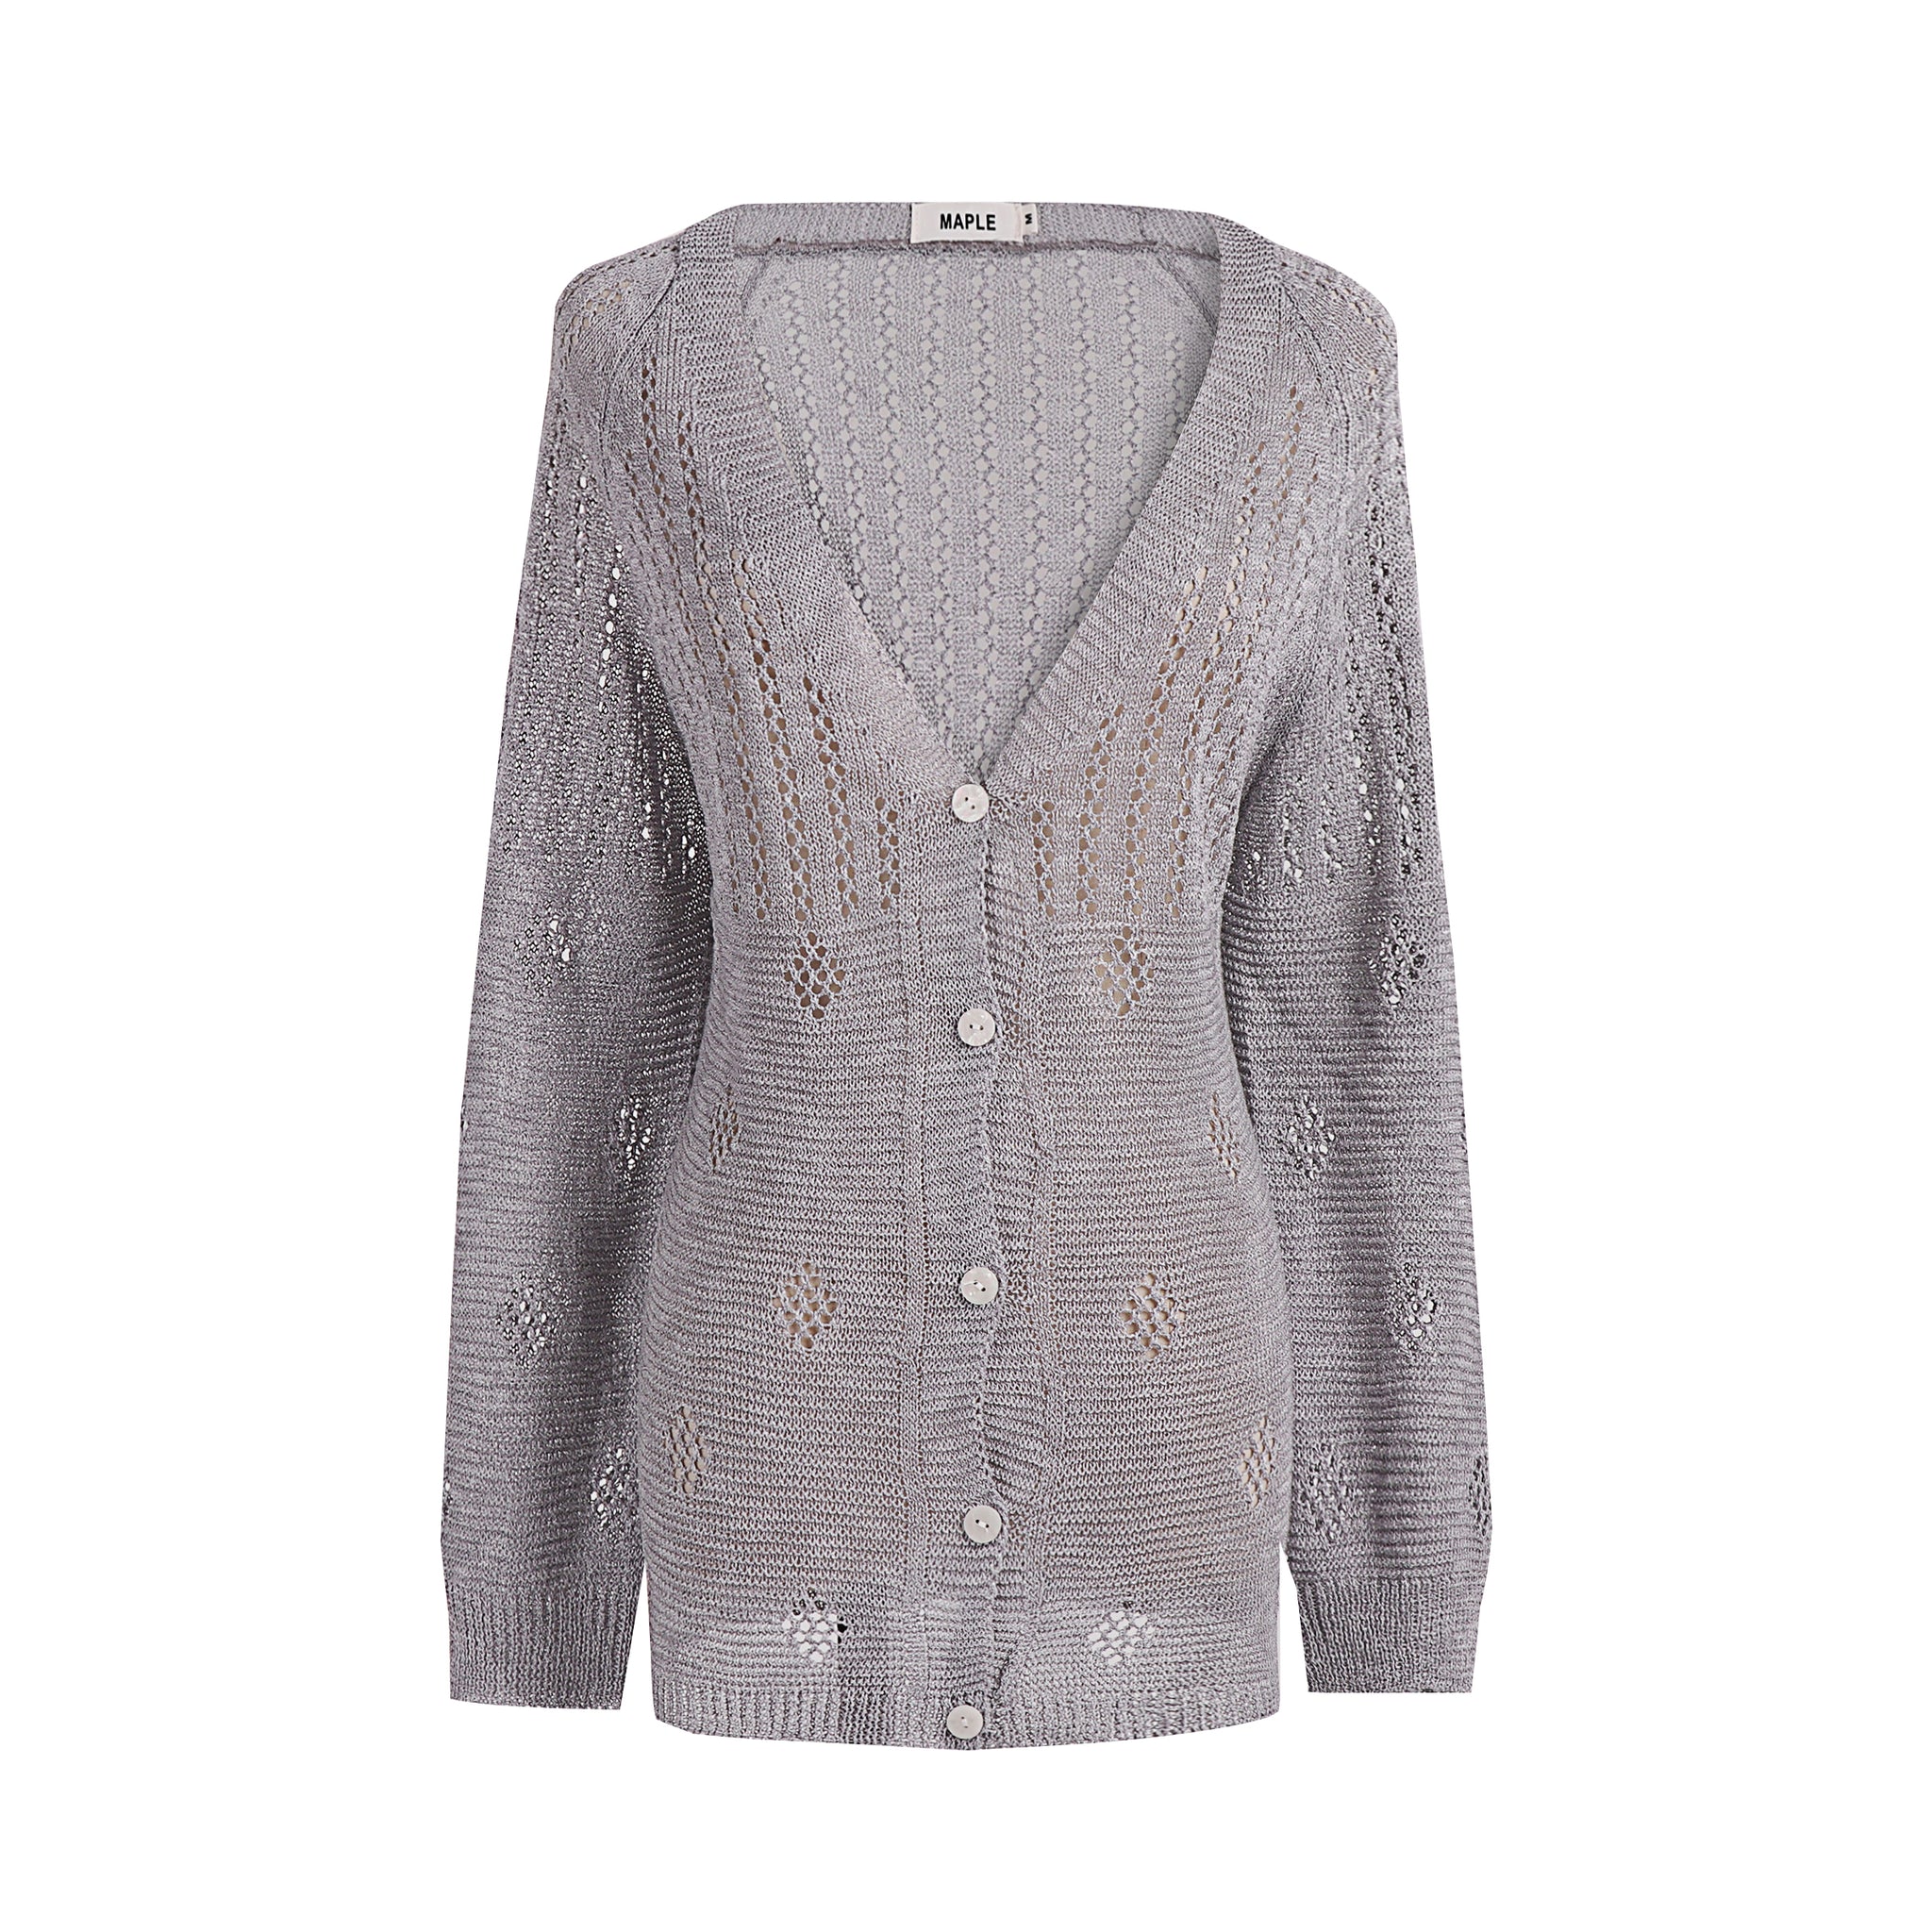 Women's Blue Cardigan with Solid pattern